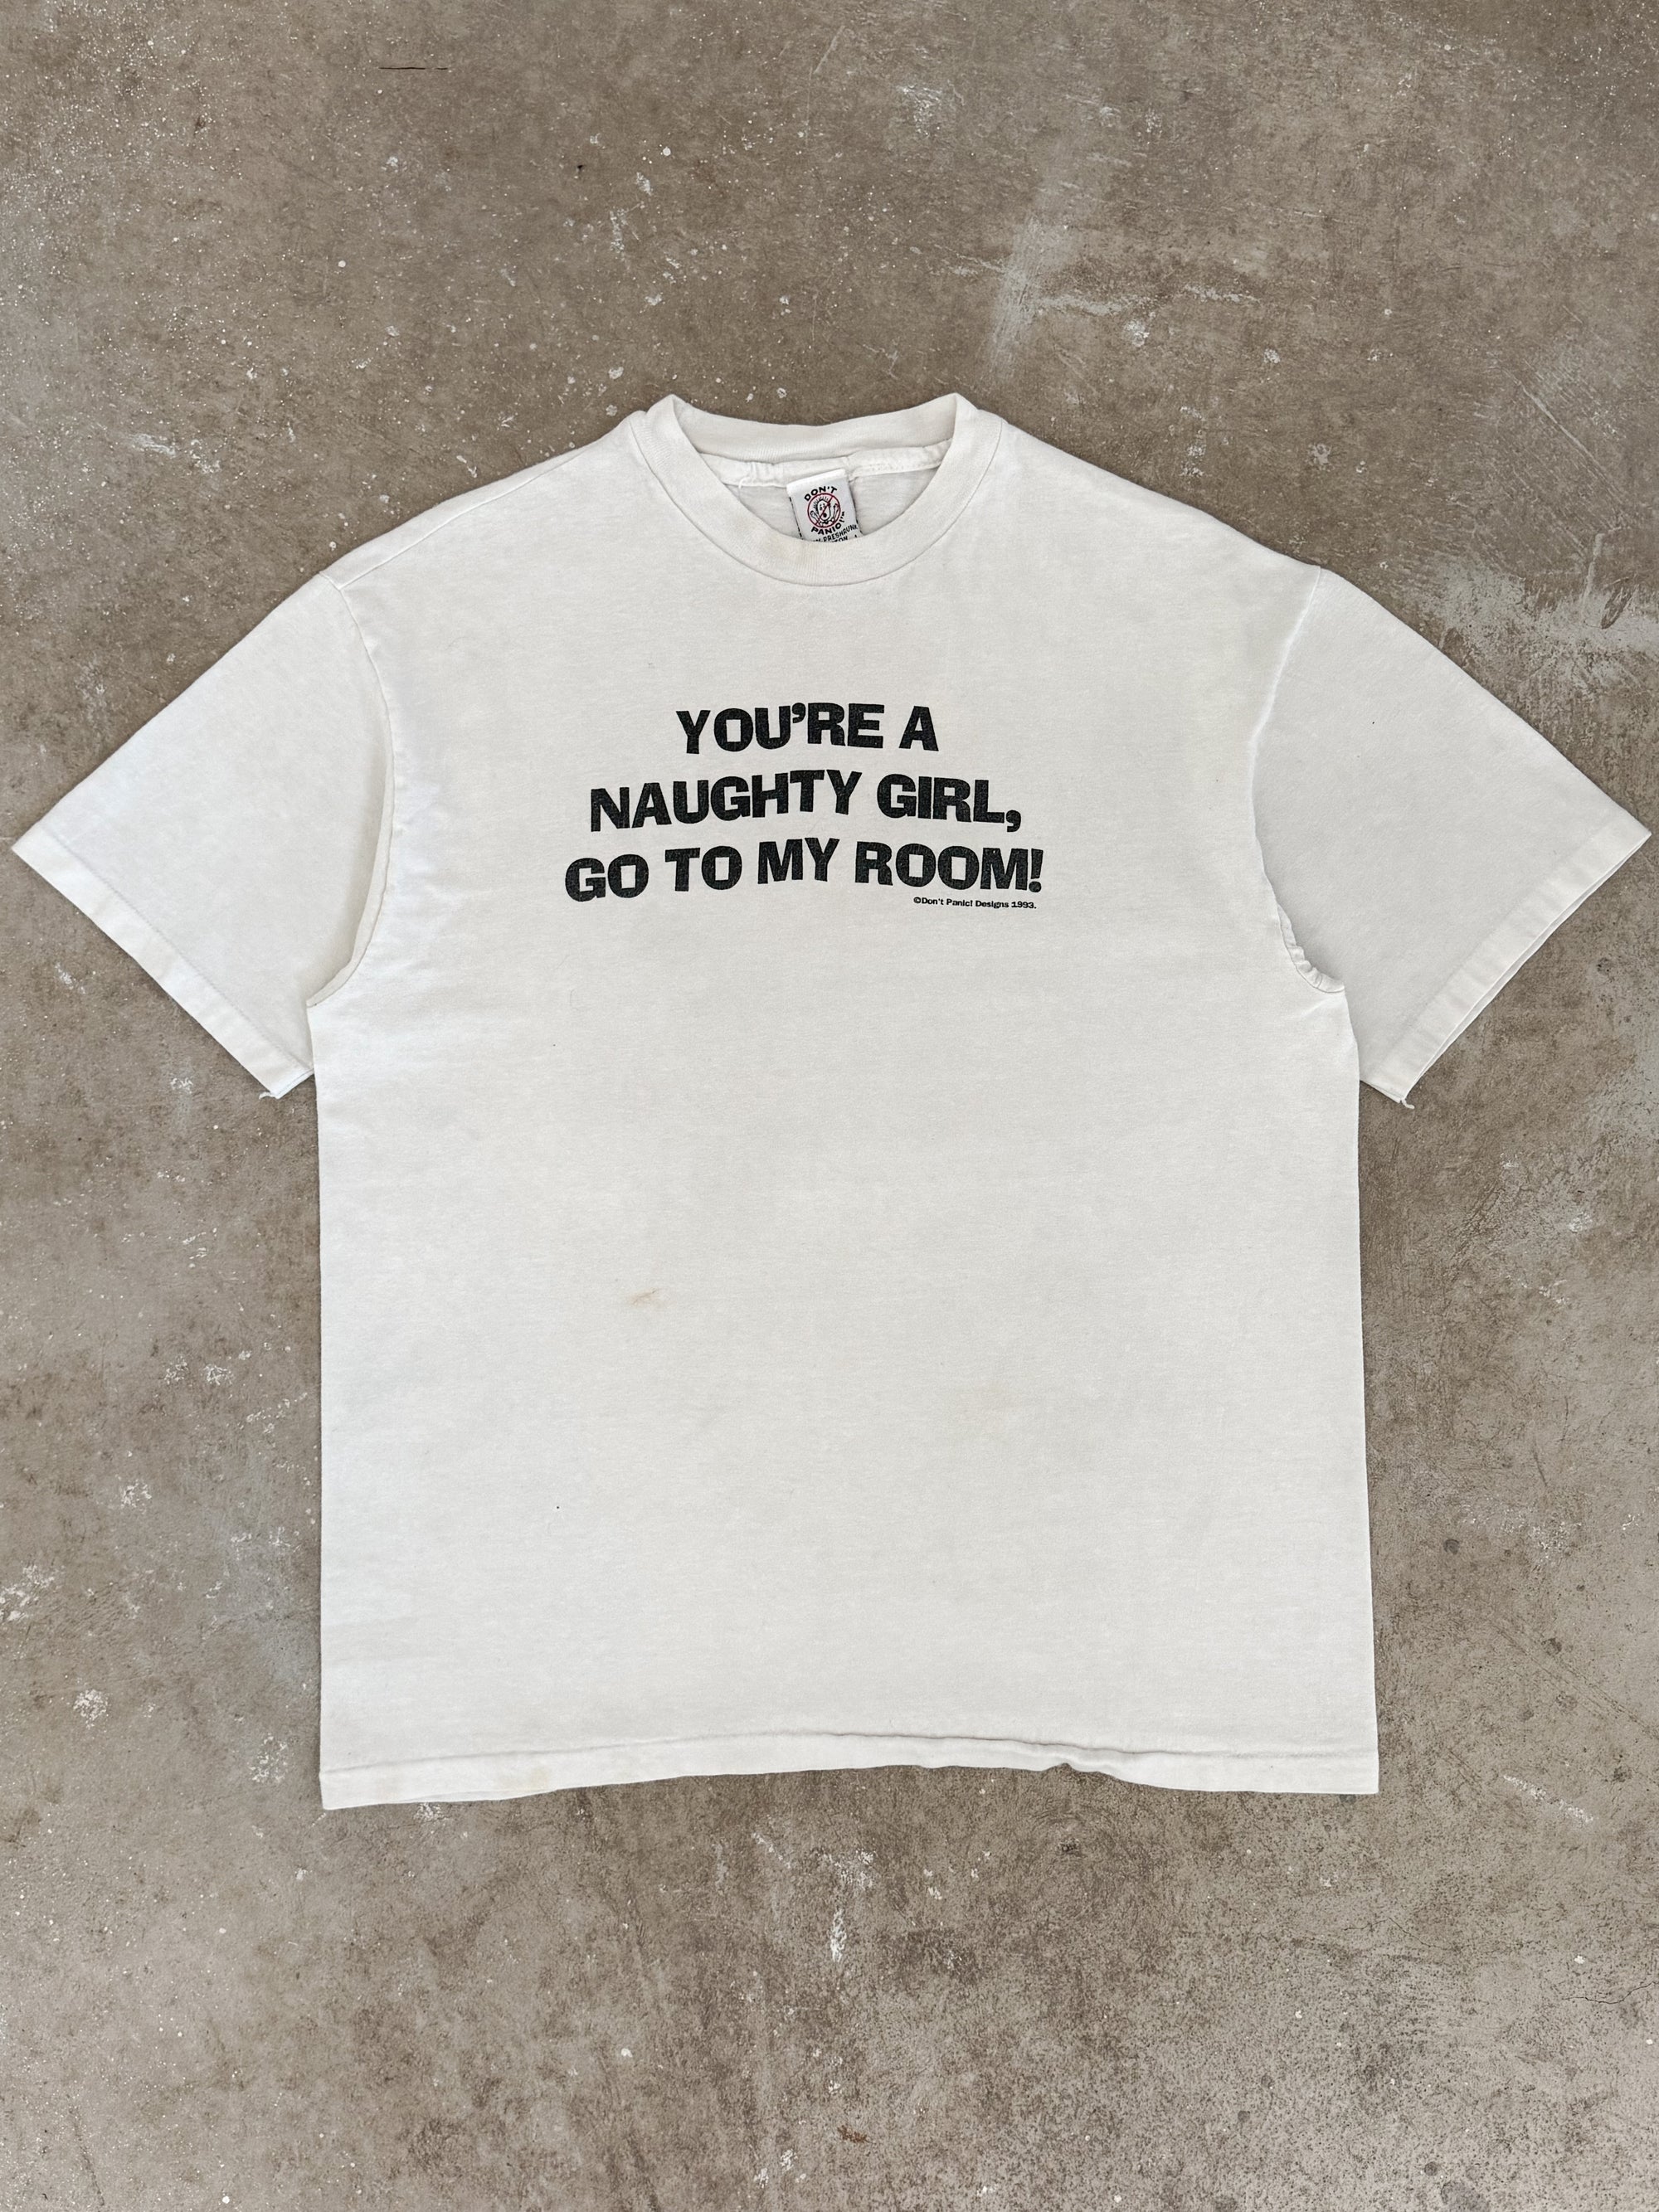 1990s "You're A Naughty Girl..." Tee (L)